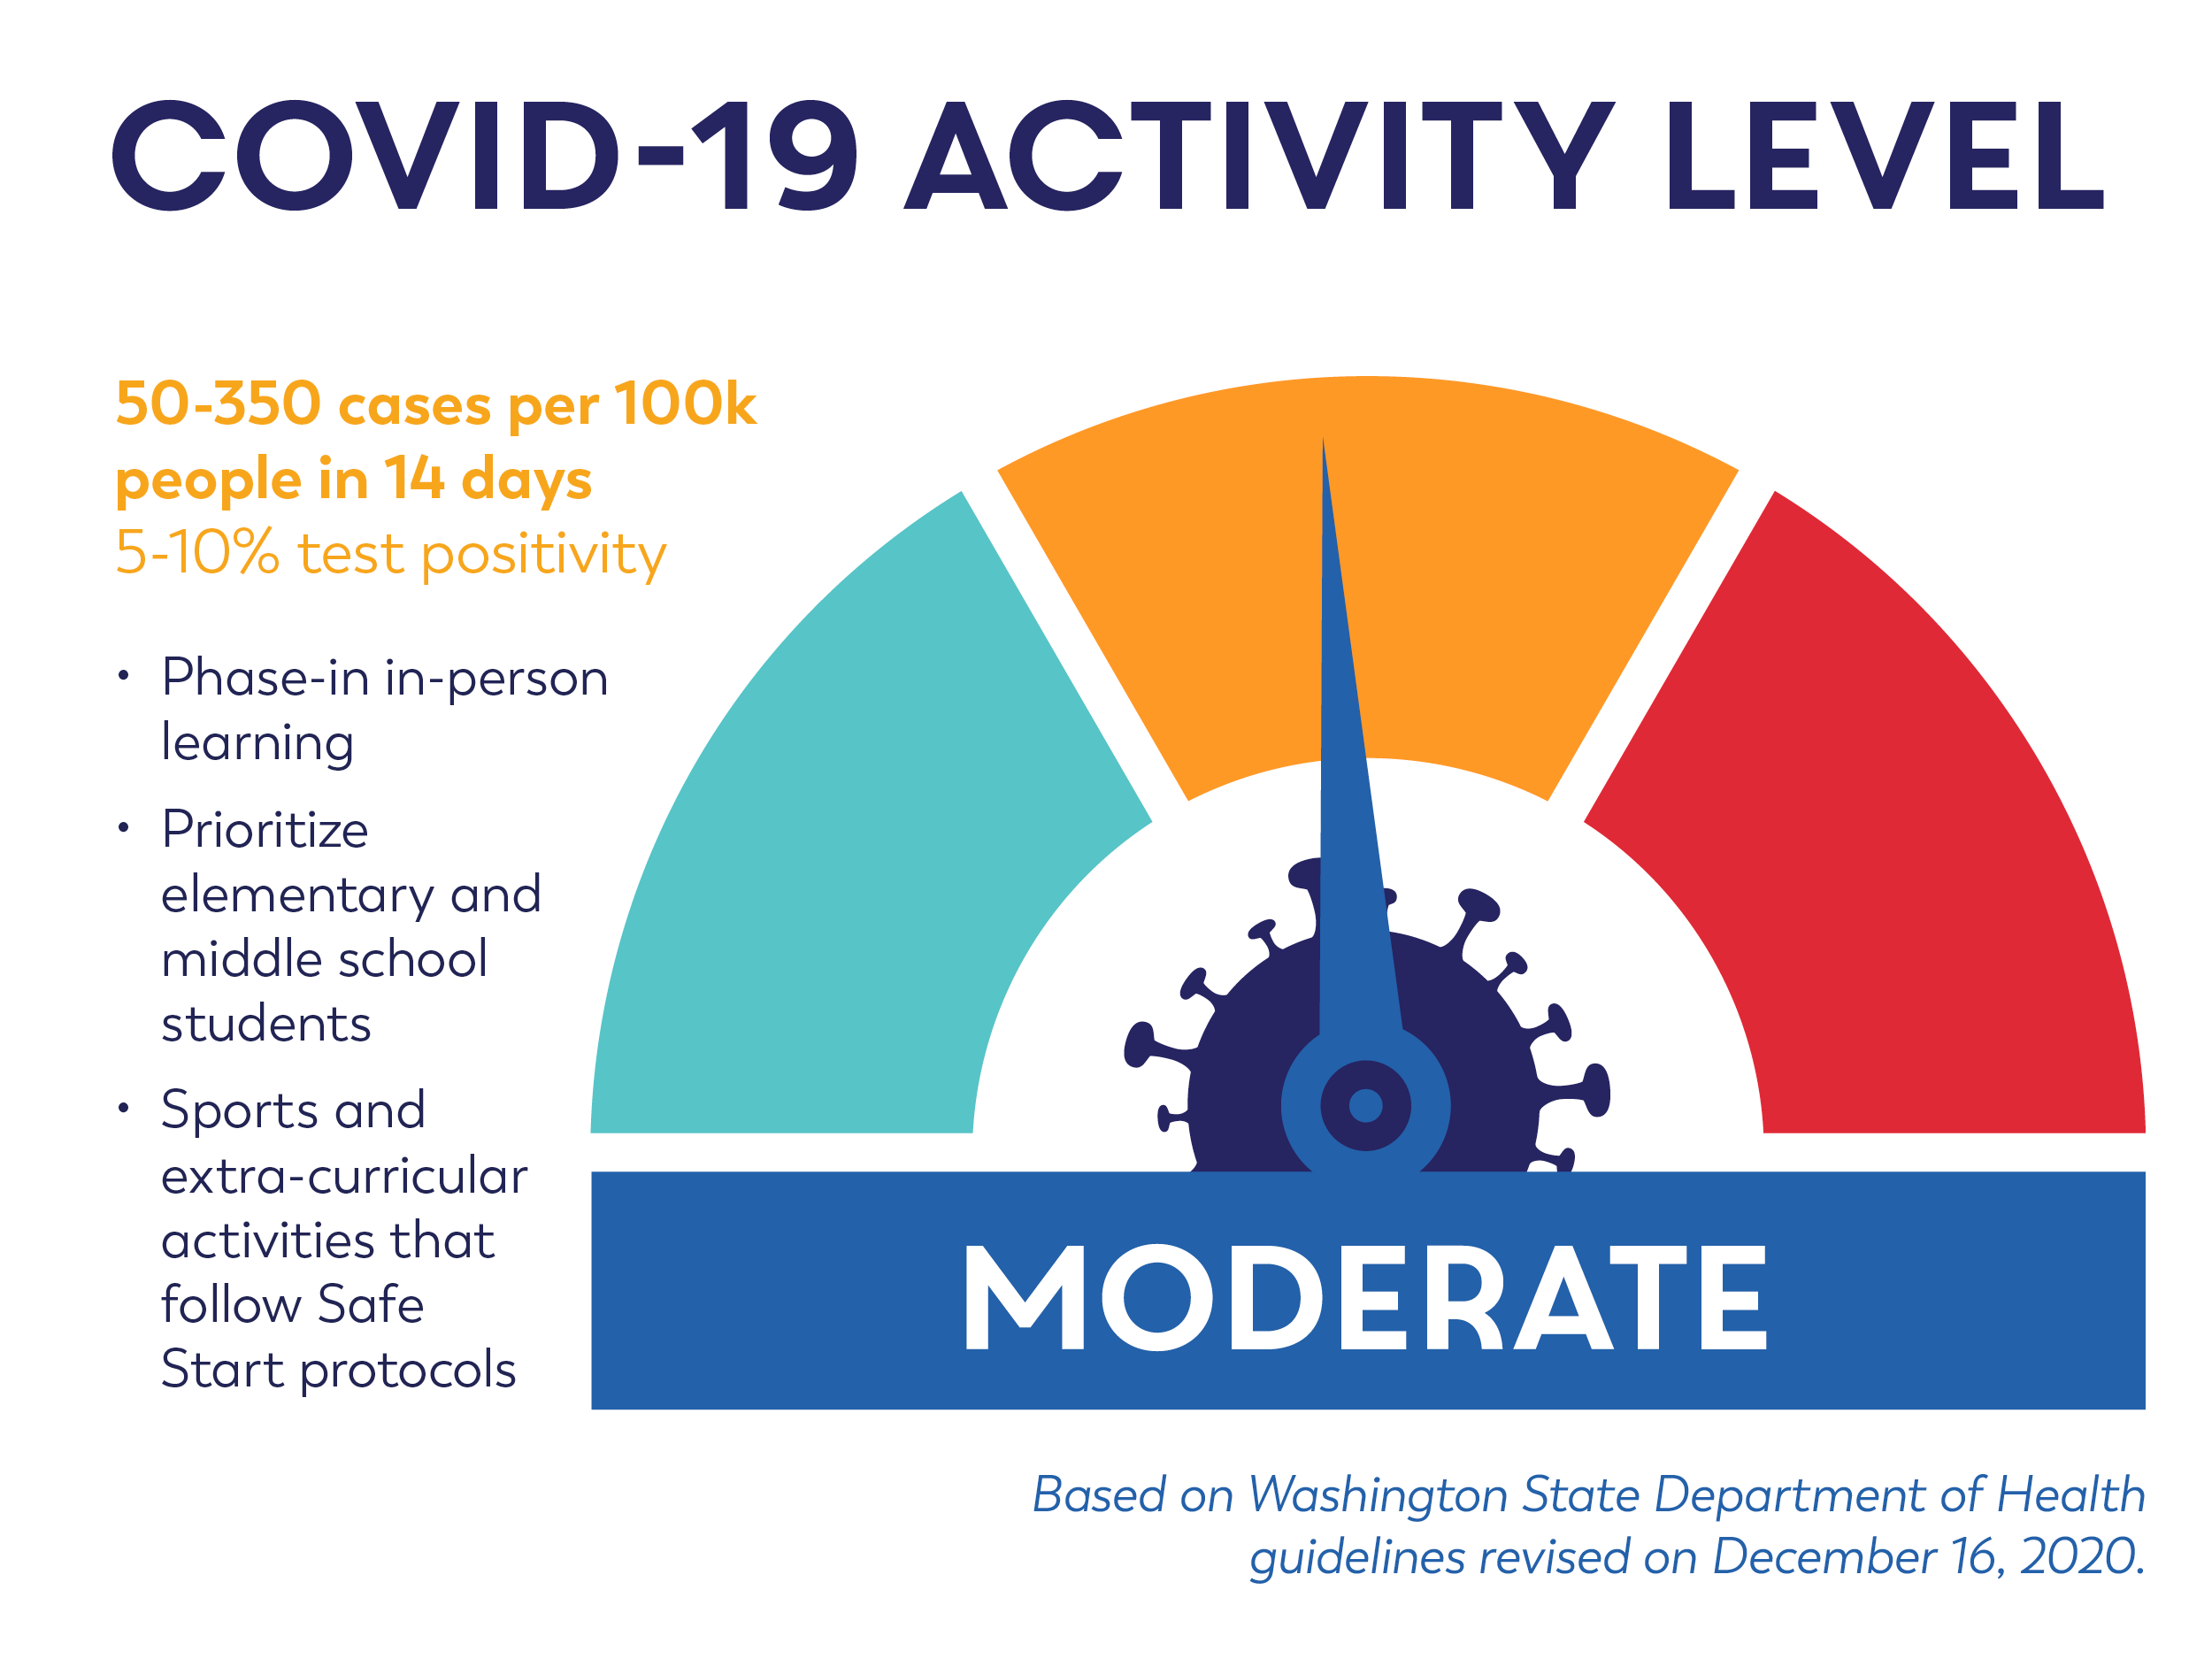 COVID-19 Activity Level dial with arrow pointing to yellow. 50-350 cases per 100k people in 14 days, 5-10% test positivity, phase in in-person learning, prioritize elementary and middle, sports and extra-curriculuar activiteis that follow safe start, Moderate level, based on Washington DOH guidelines revised December 2020